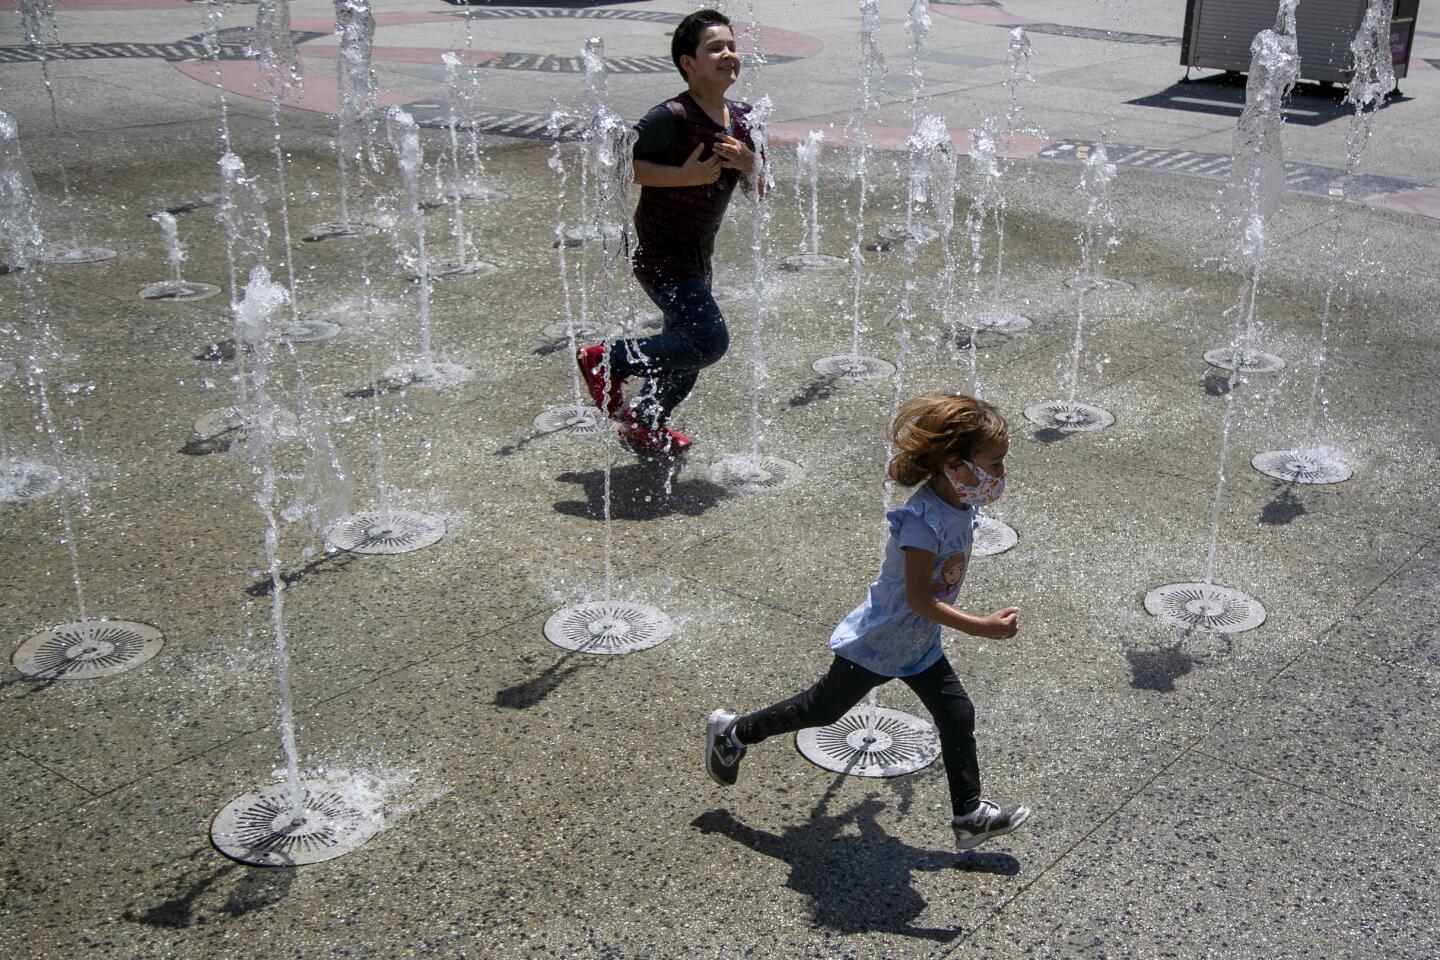 Two children run through a water fountain at Hollywood & Highland.